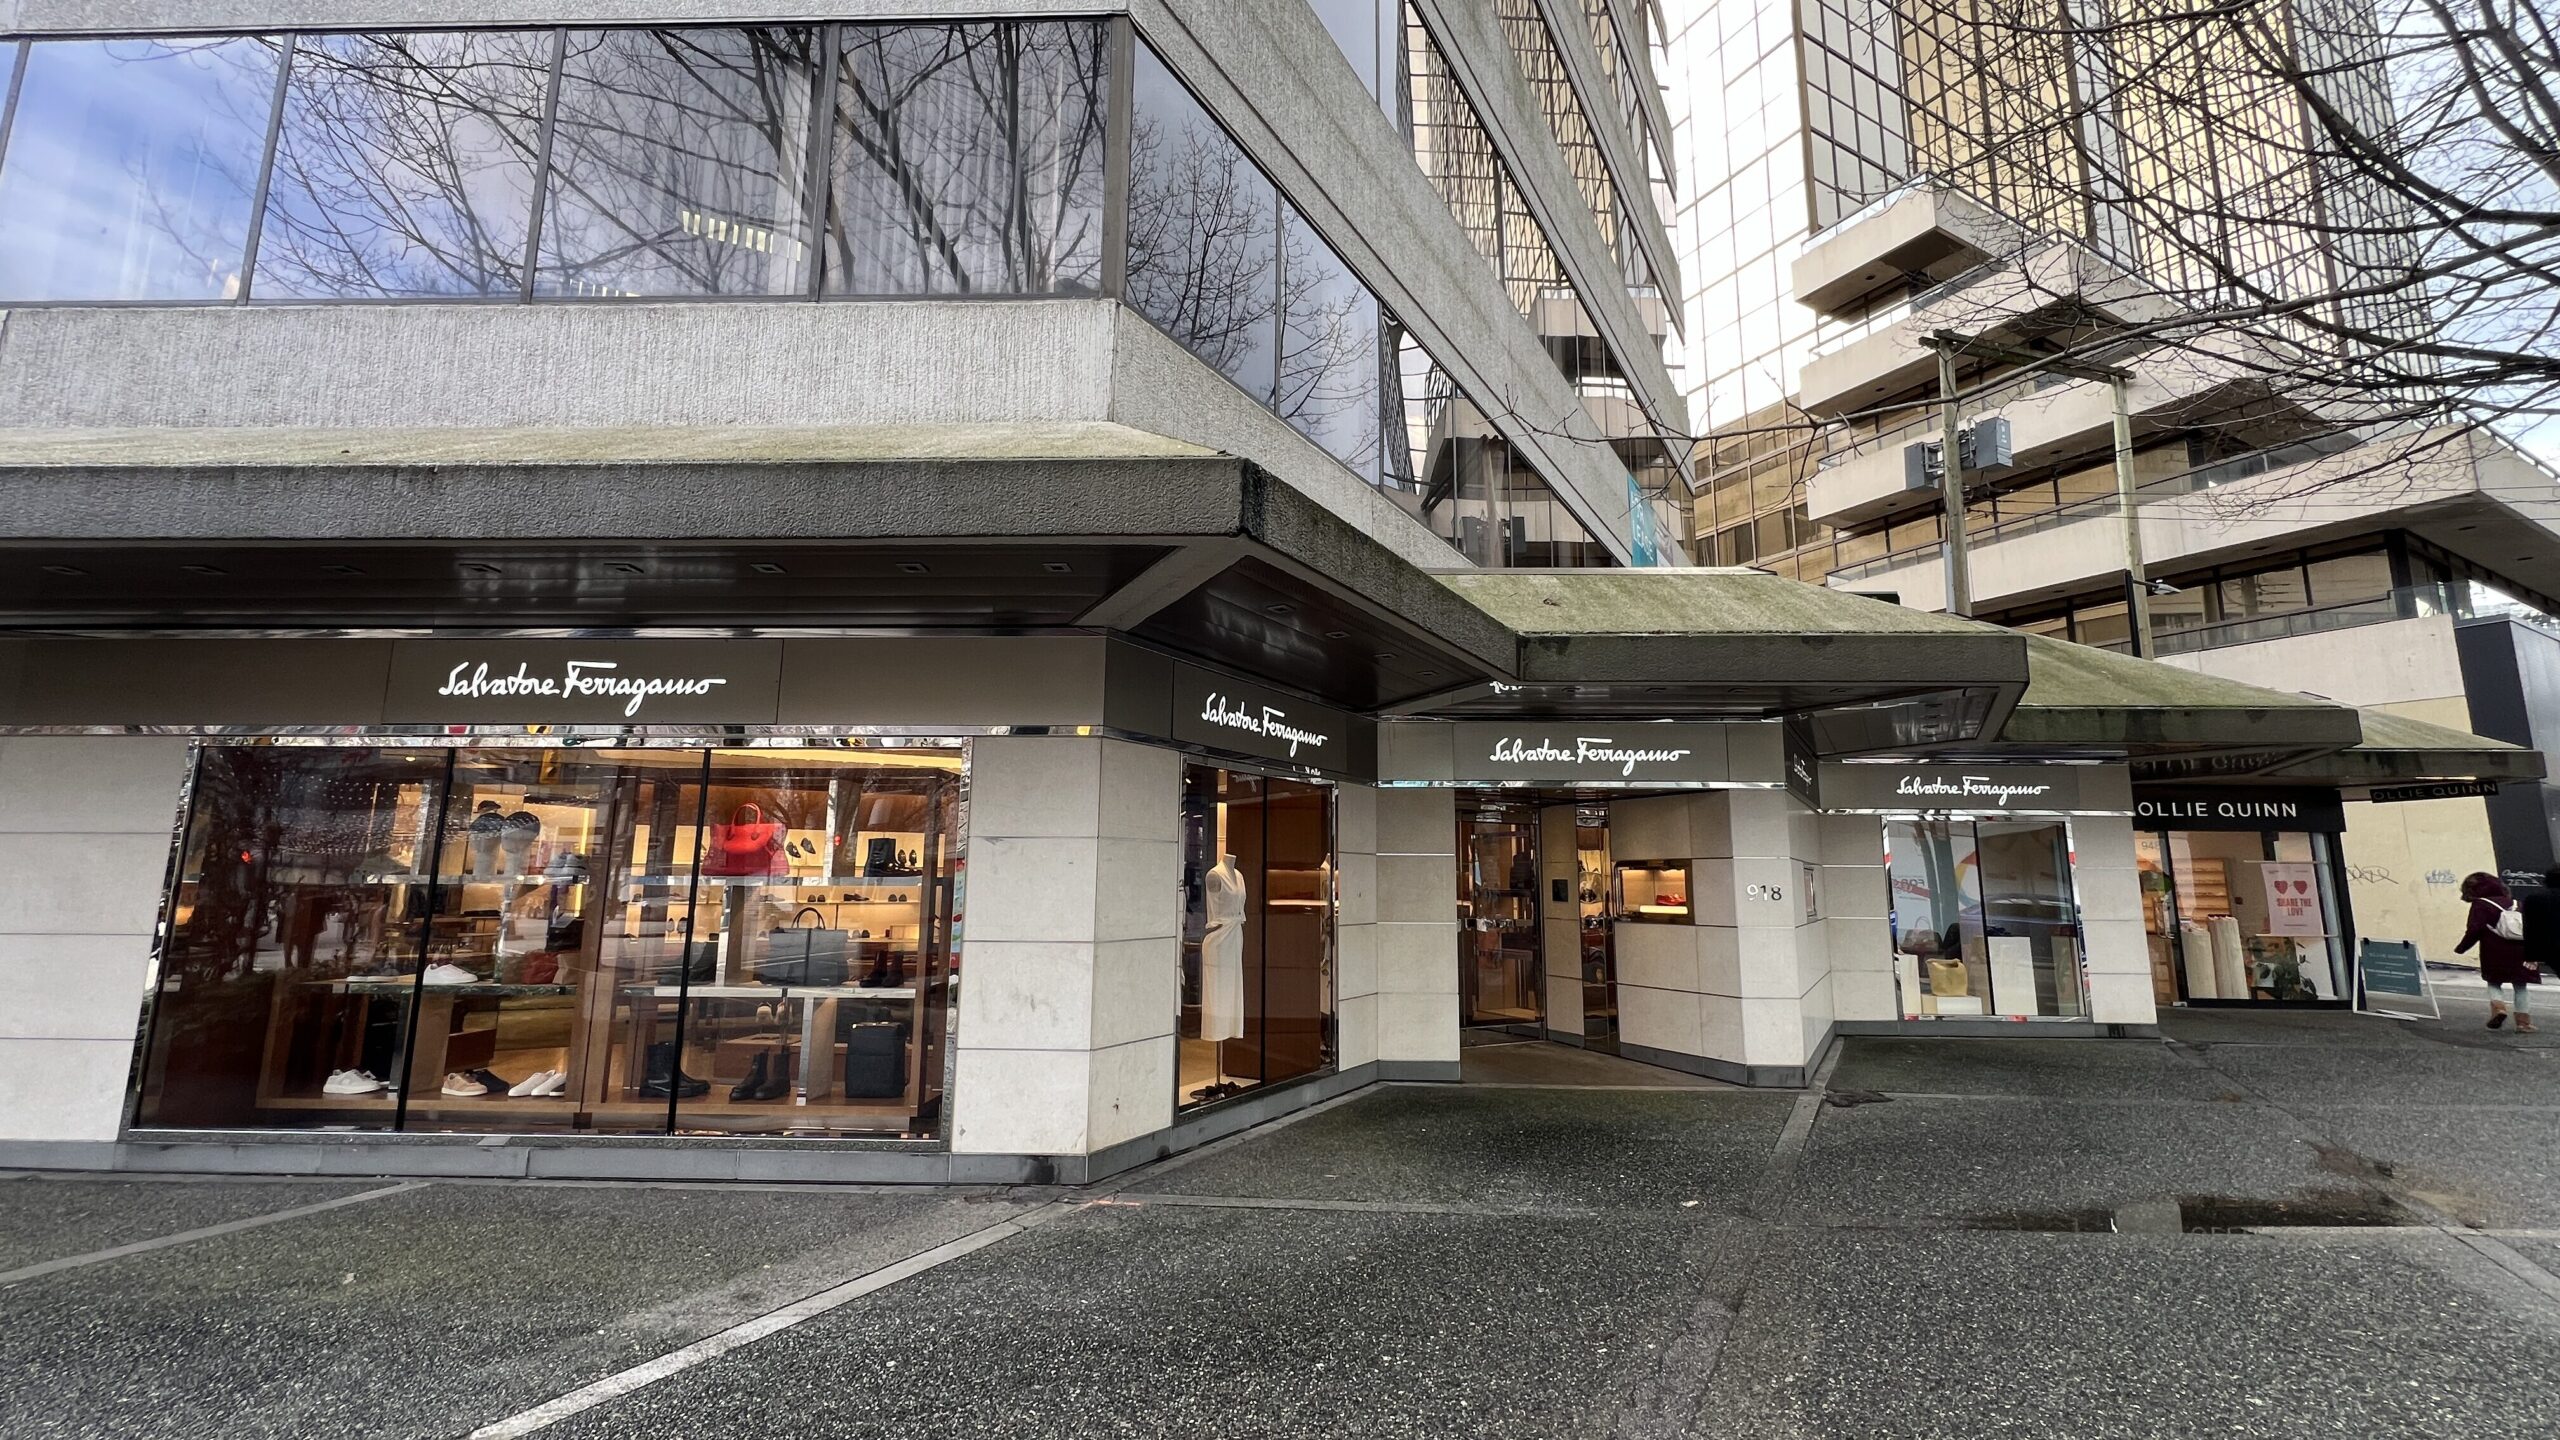 Mountain Warehouse Canada - Hello Robson Street! 👋 Our brand new store  opened in Robson Street, Vancouver BC last week, come in and shop all your Mountain  Warehouse favourites!